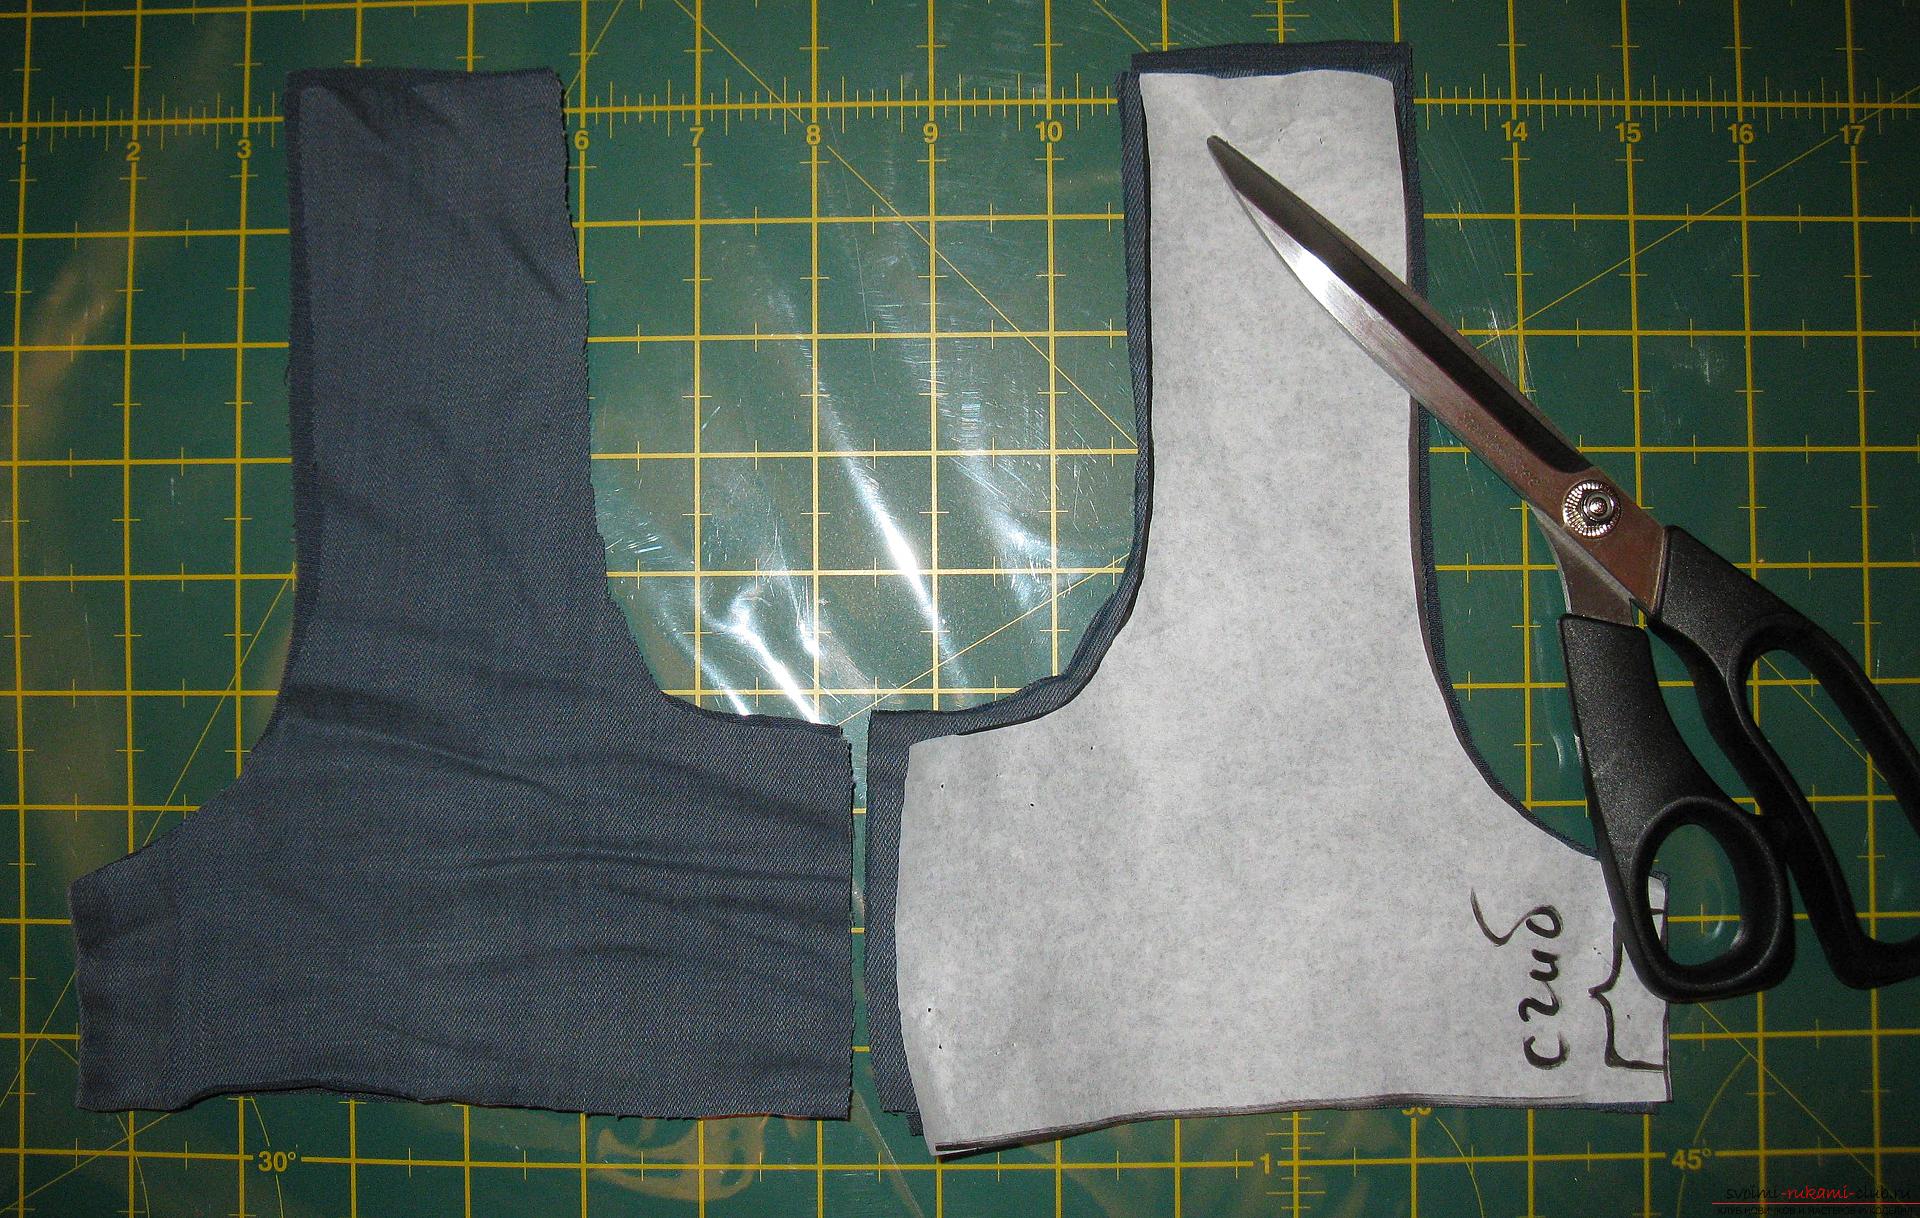 Step-by-step photos to the lesson on sewing a shopping bag. Photo №1